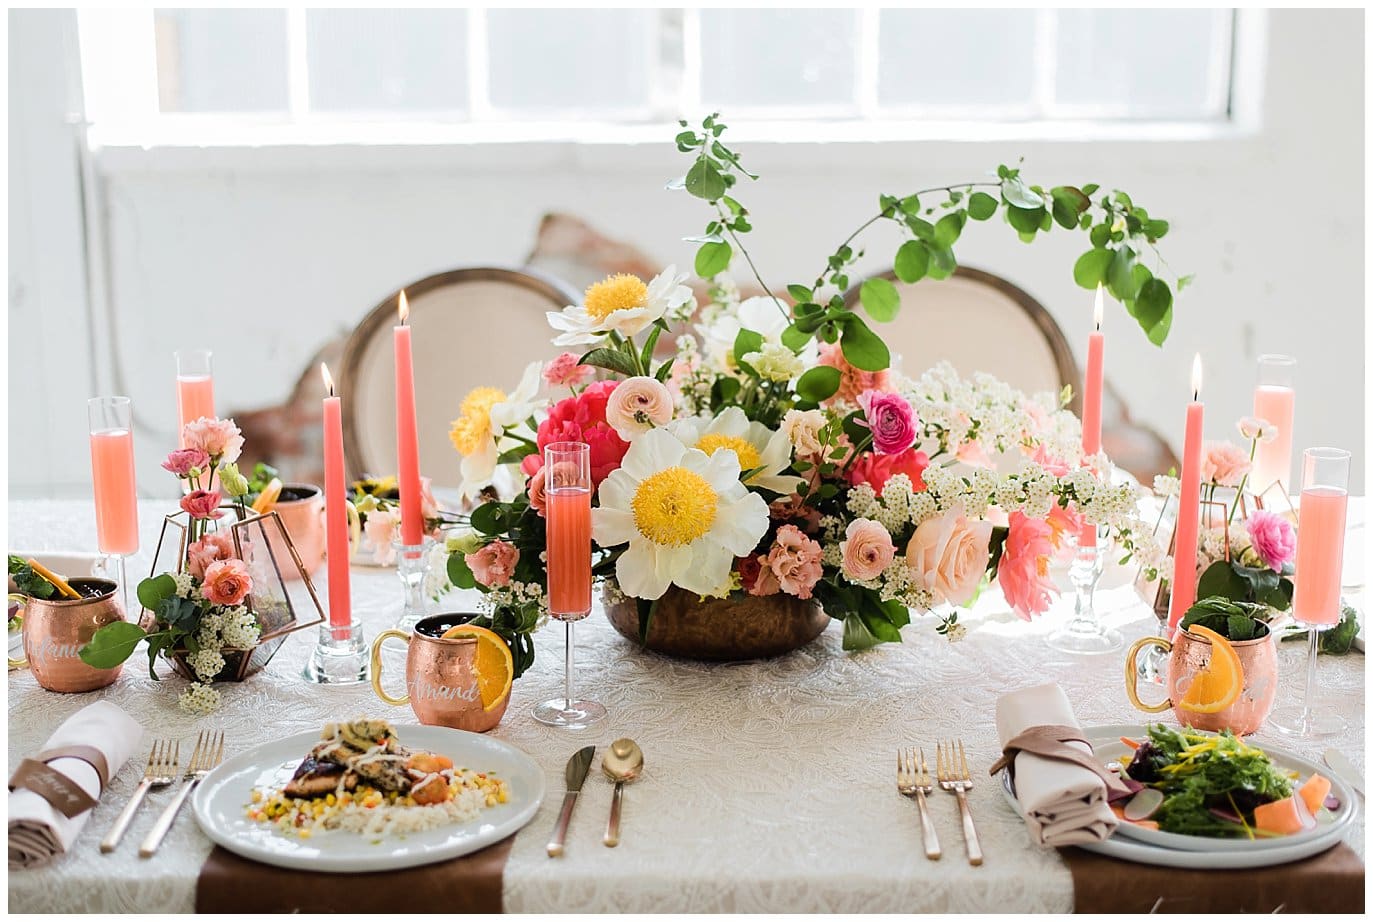 colorful and classy wedding table inspiration at summer blanc wedding by blanc wedding photographer Jennie Crate photographer